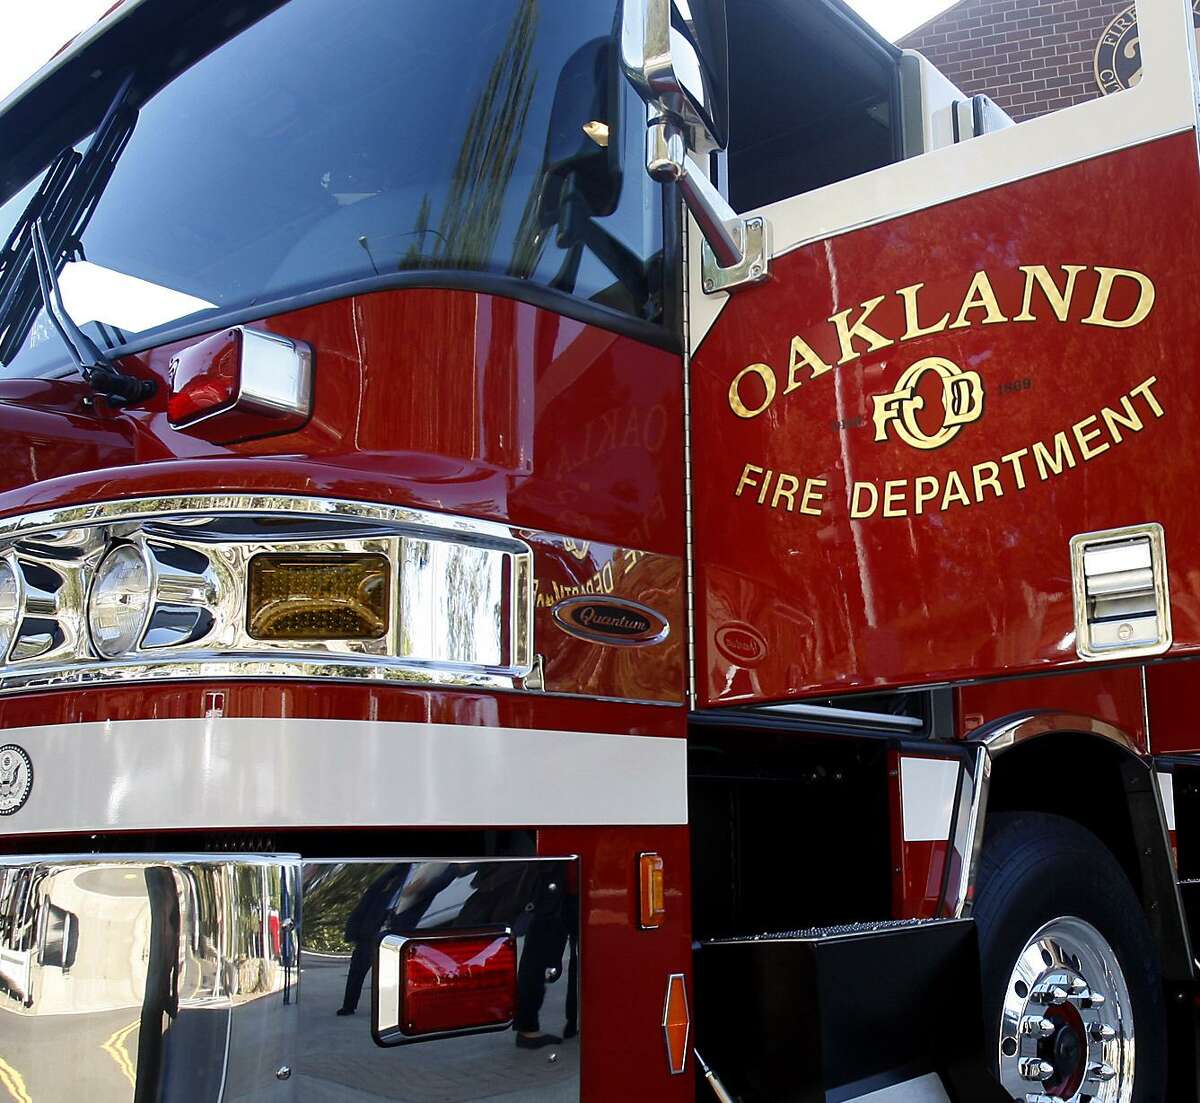 Oakland Fire Department engine sit in outside fire station in Oakland.